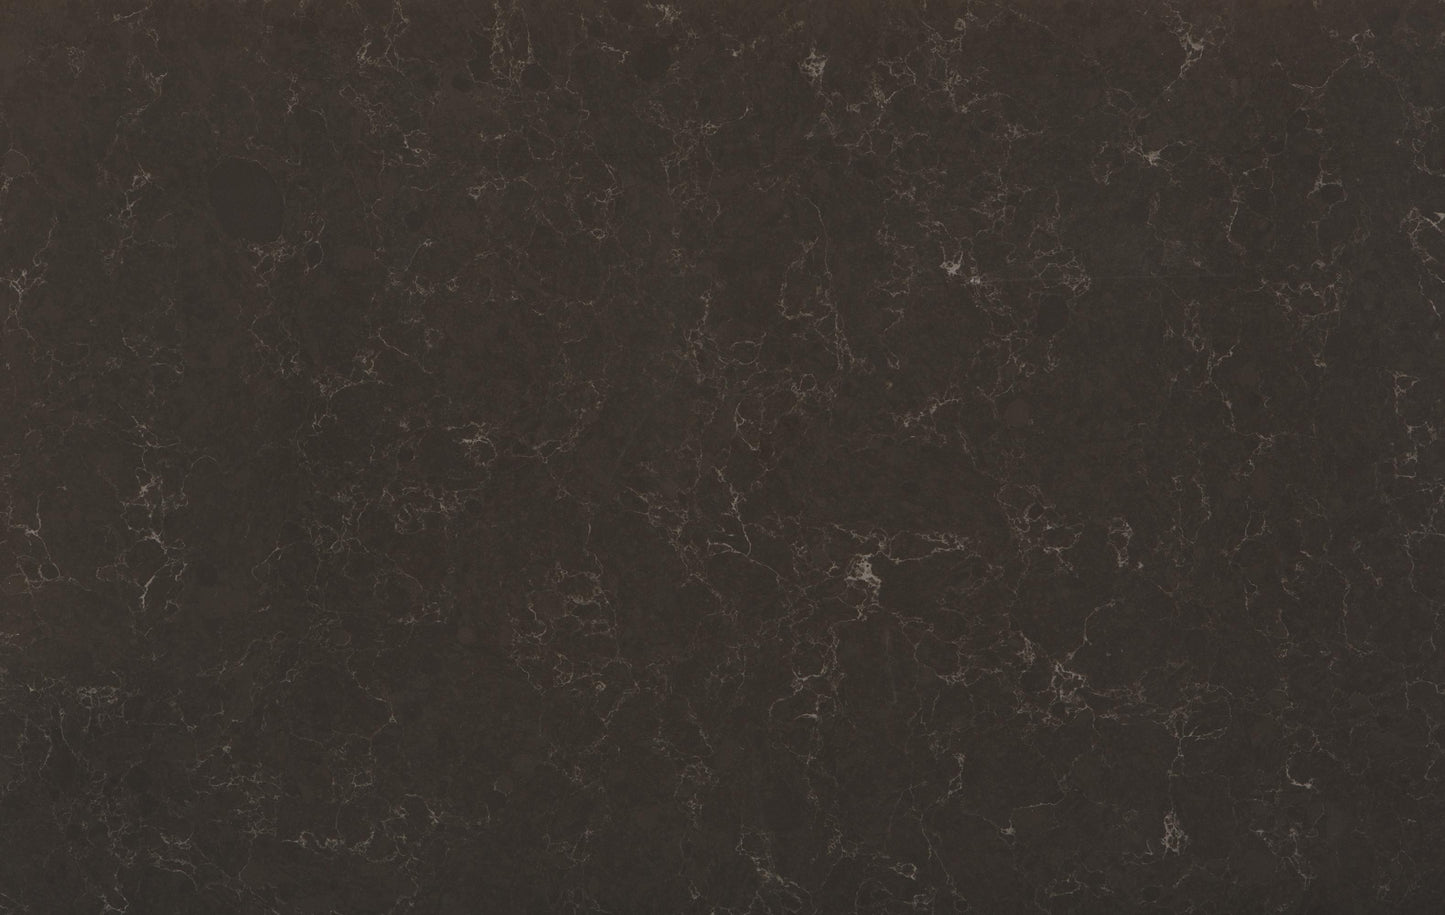 Calypso, Quartz Stone Surface Material - Outlet stock from Cosentino.